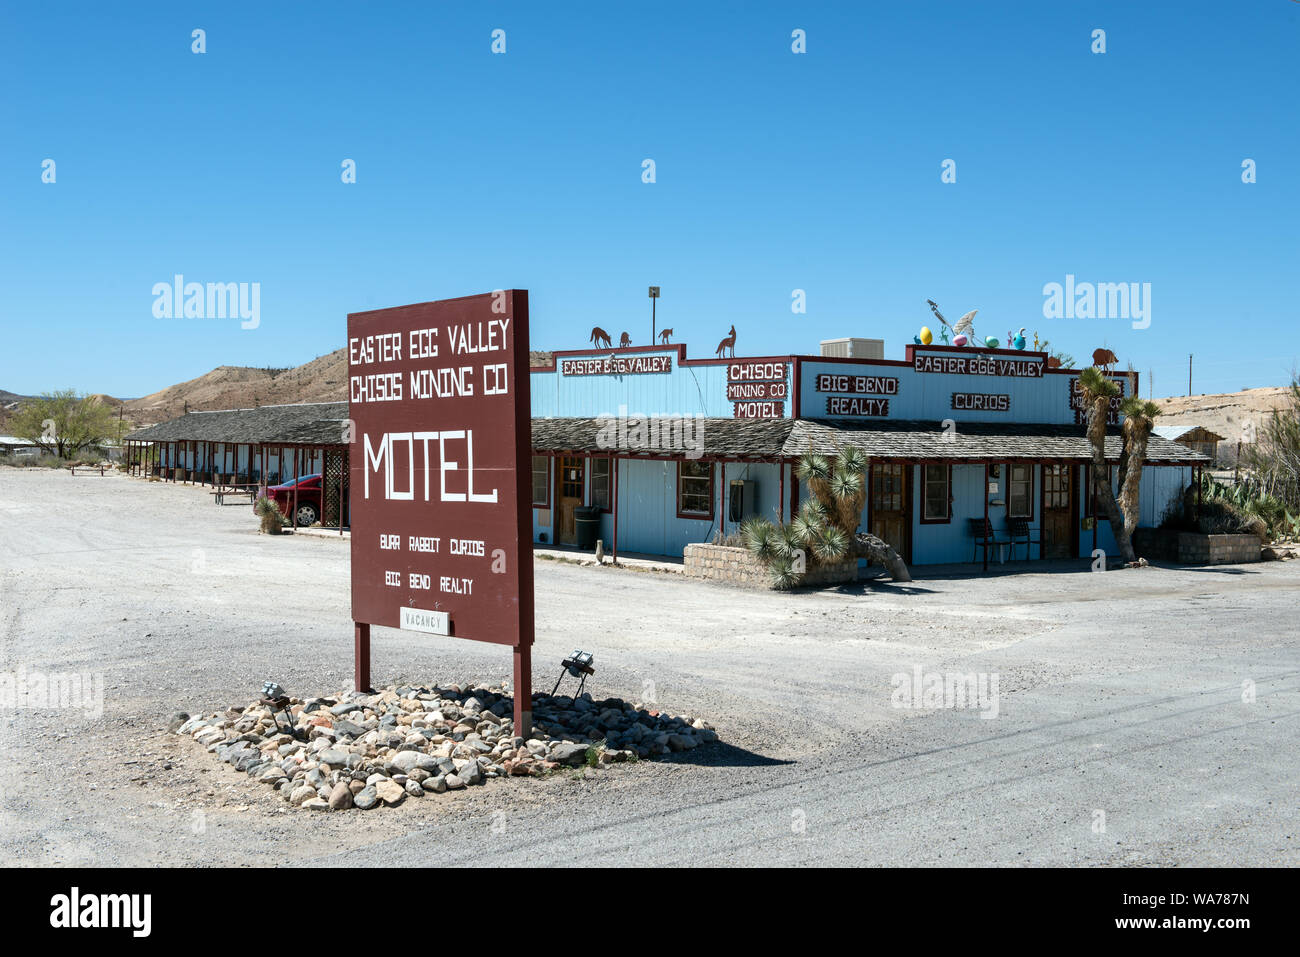 A little motel and trading post in the ghost town, some of which is still occupied and some of which consists of ruins of the Chisos quicksilver-mining company which operated from 1905 into the early 1940s, and the residences of those who worked there. Terlingua, Texas Stock Photo